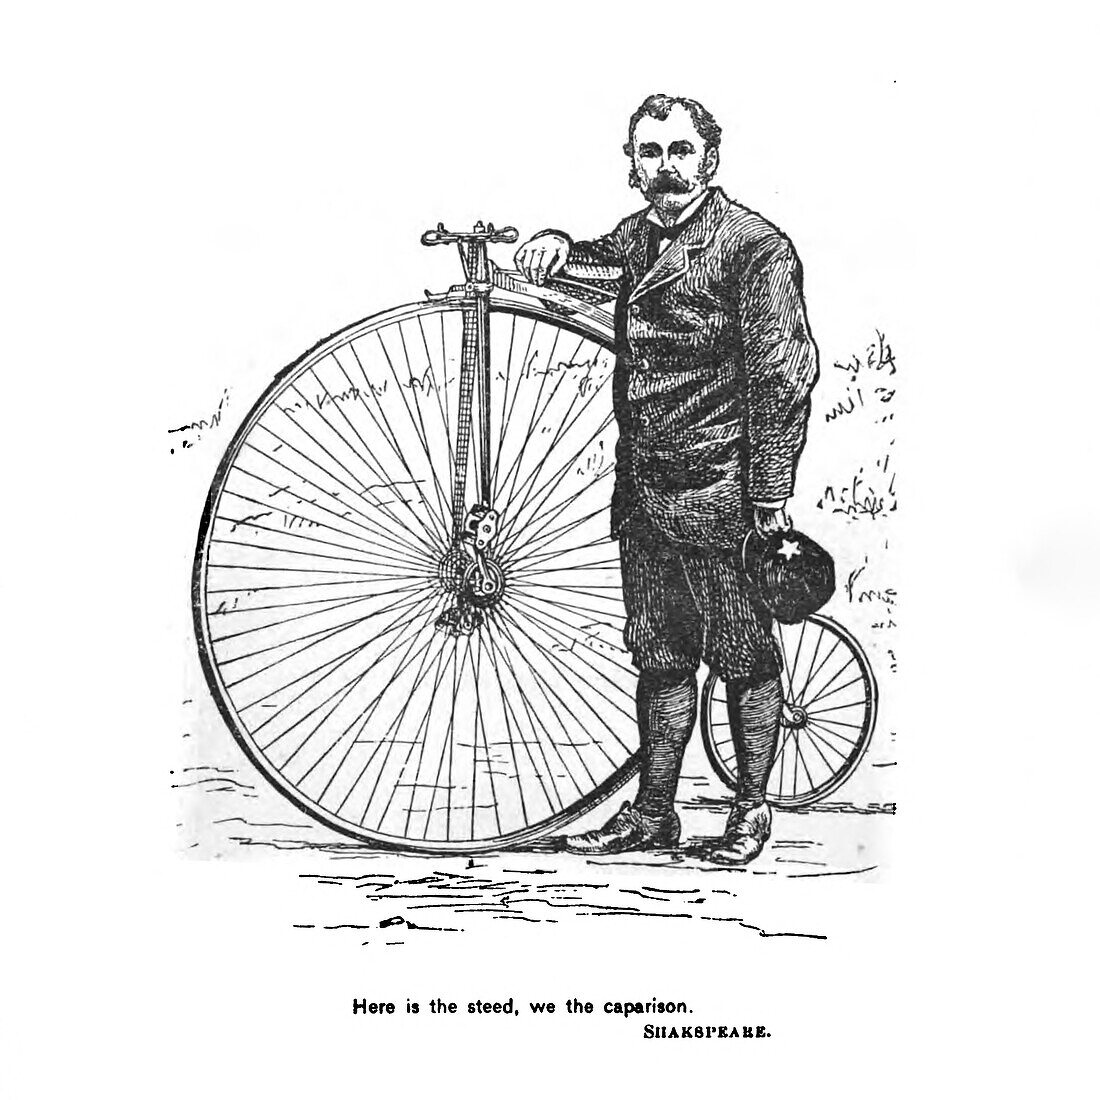 Man and penny-farthing, 19th century illustration